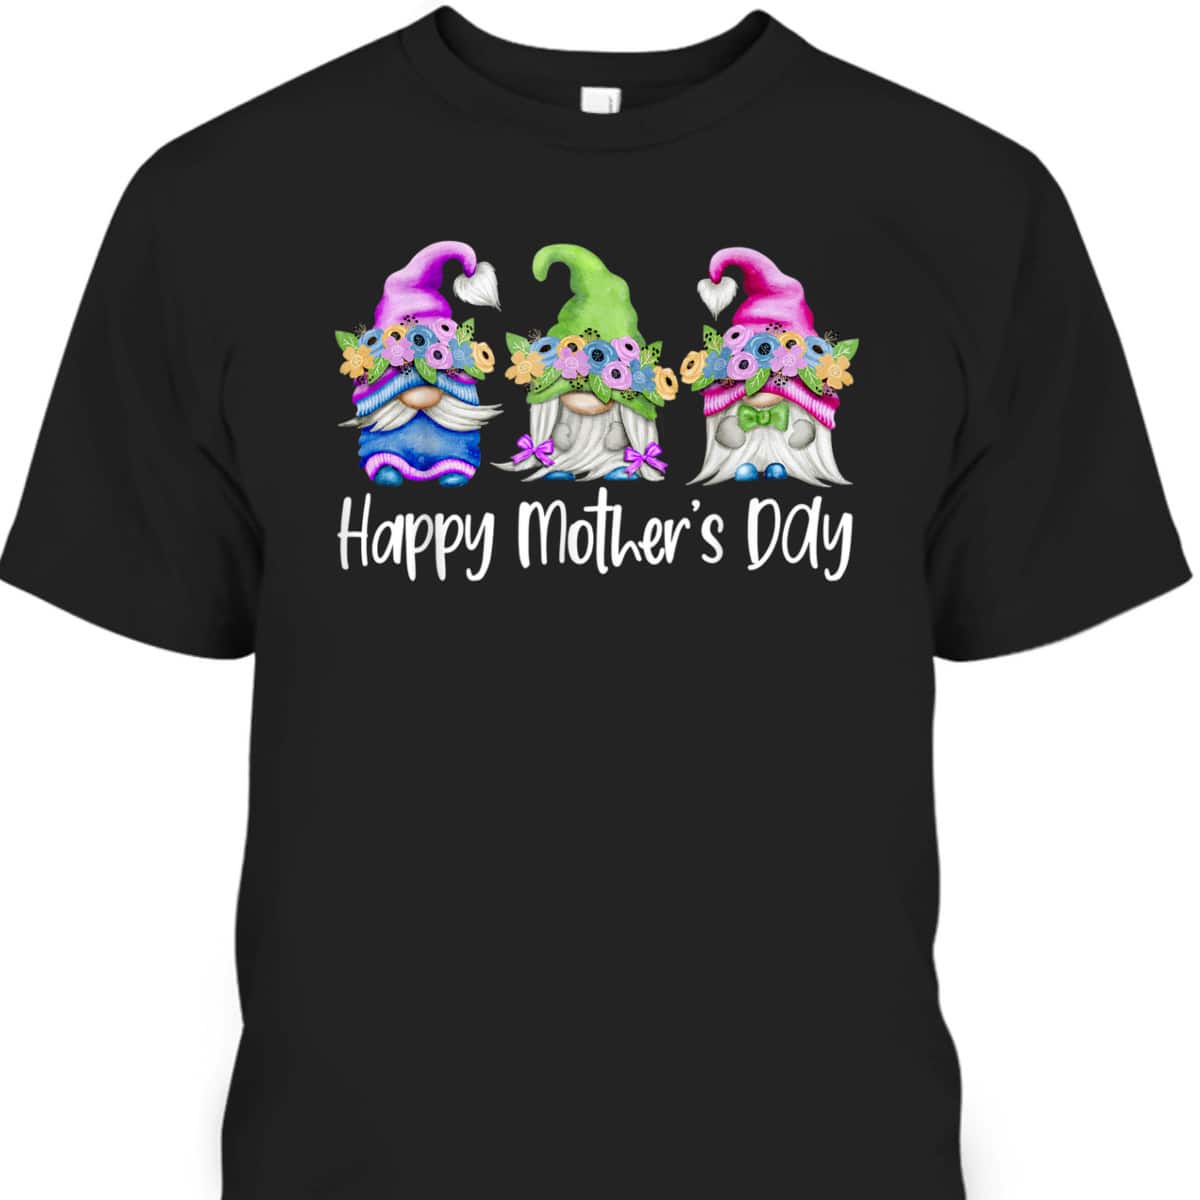 Happy Mother's Day T-Shirt Gnome Flowers Gift For Mom